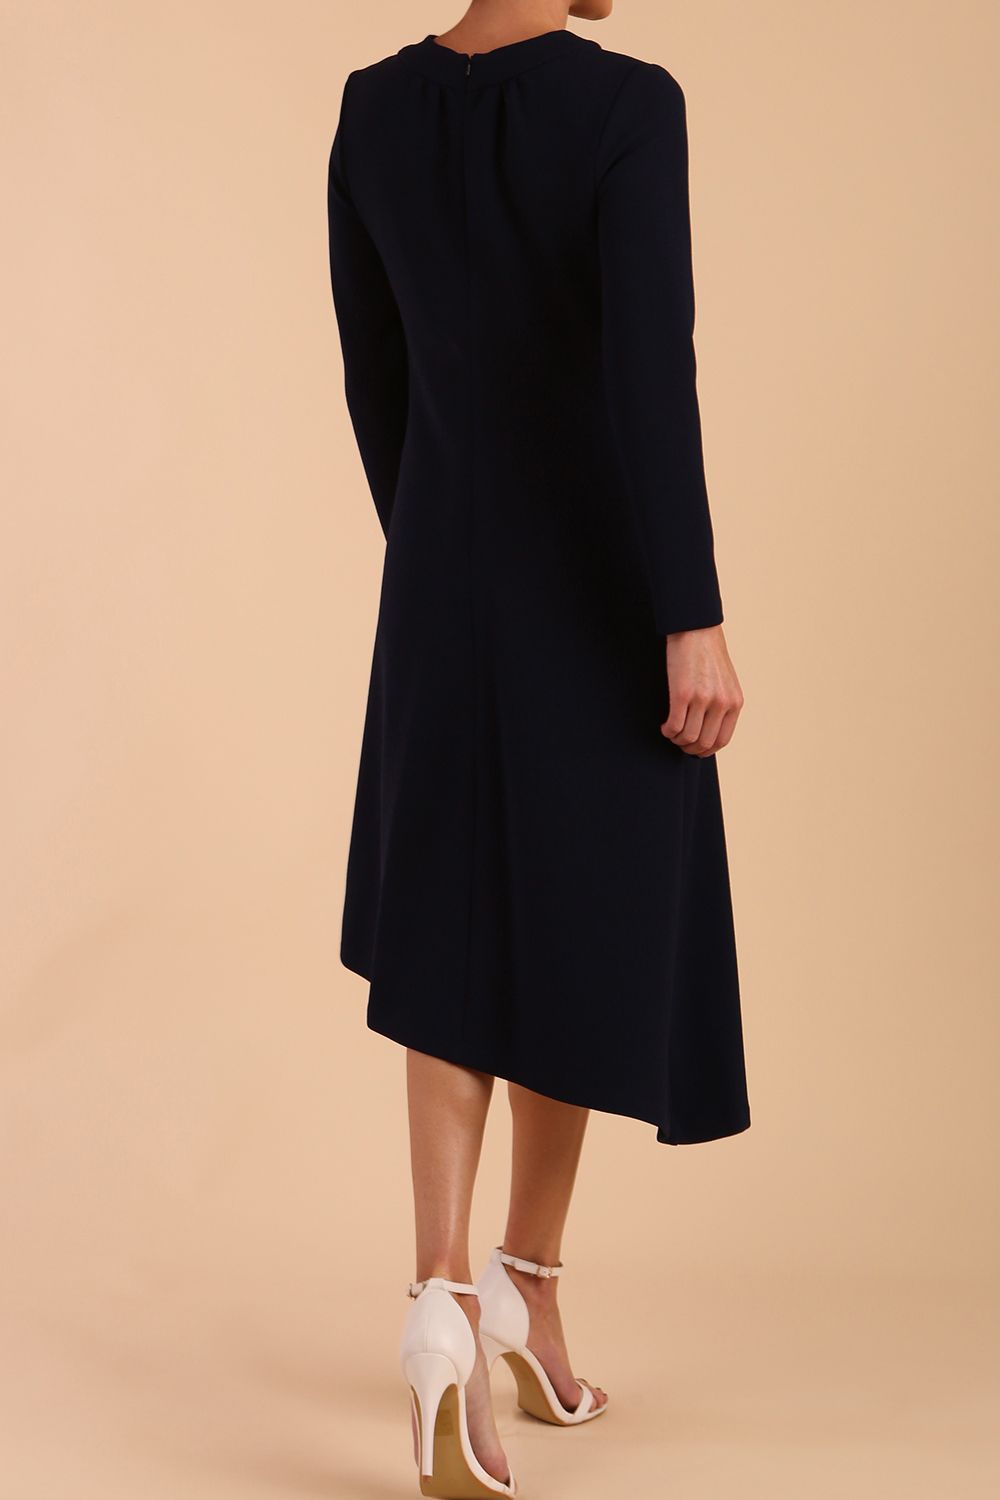 model is wearing diva catwalk dartington asymmetric skirt midaxi long sleeve dress with rounded pleated neckline a-line style in navy blue back